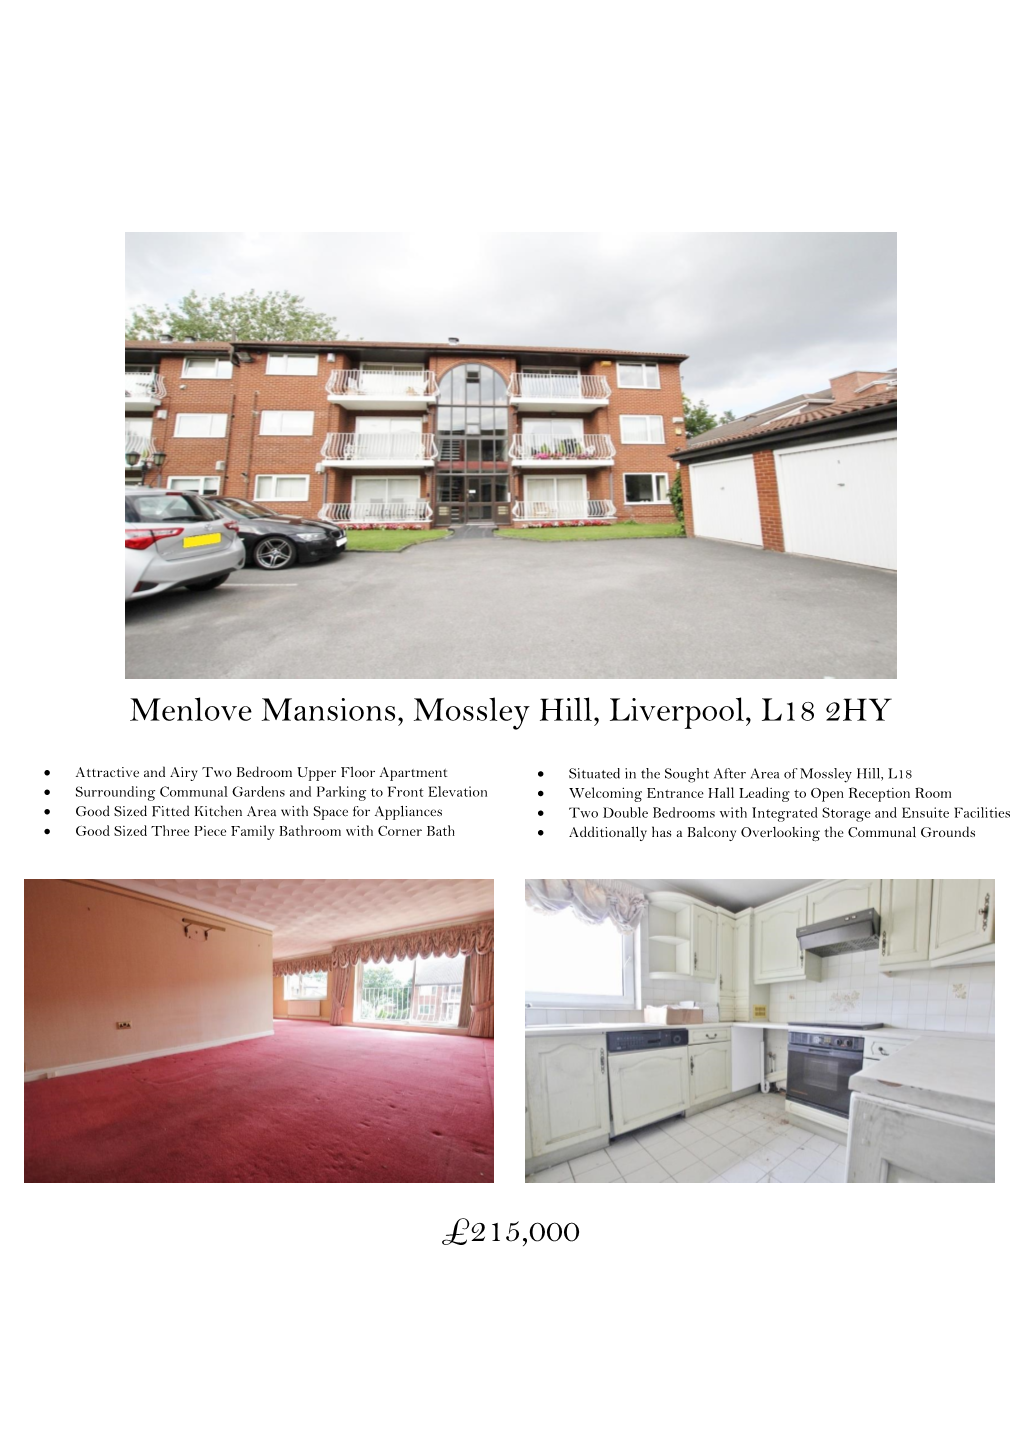 Menlove Mansions, Mossley Hill, Liverpool, L18 2HY £215,000